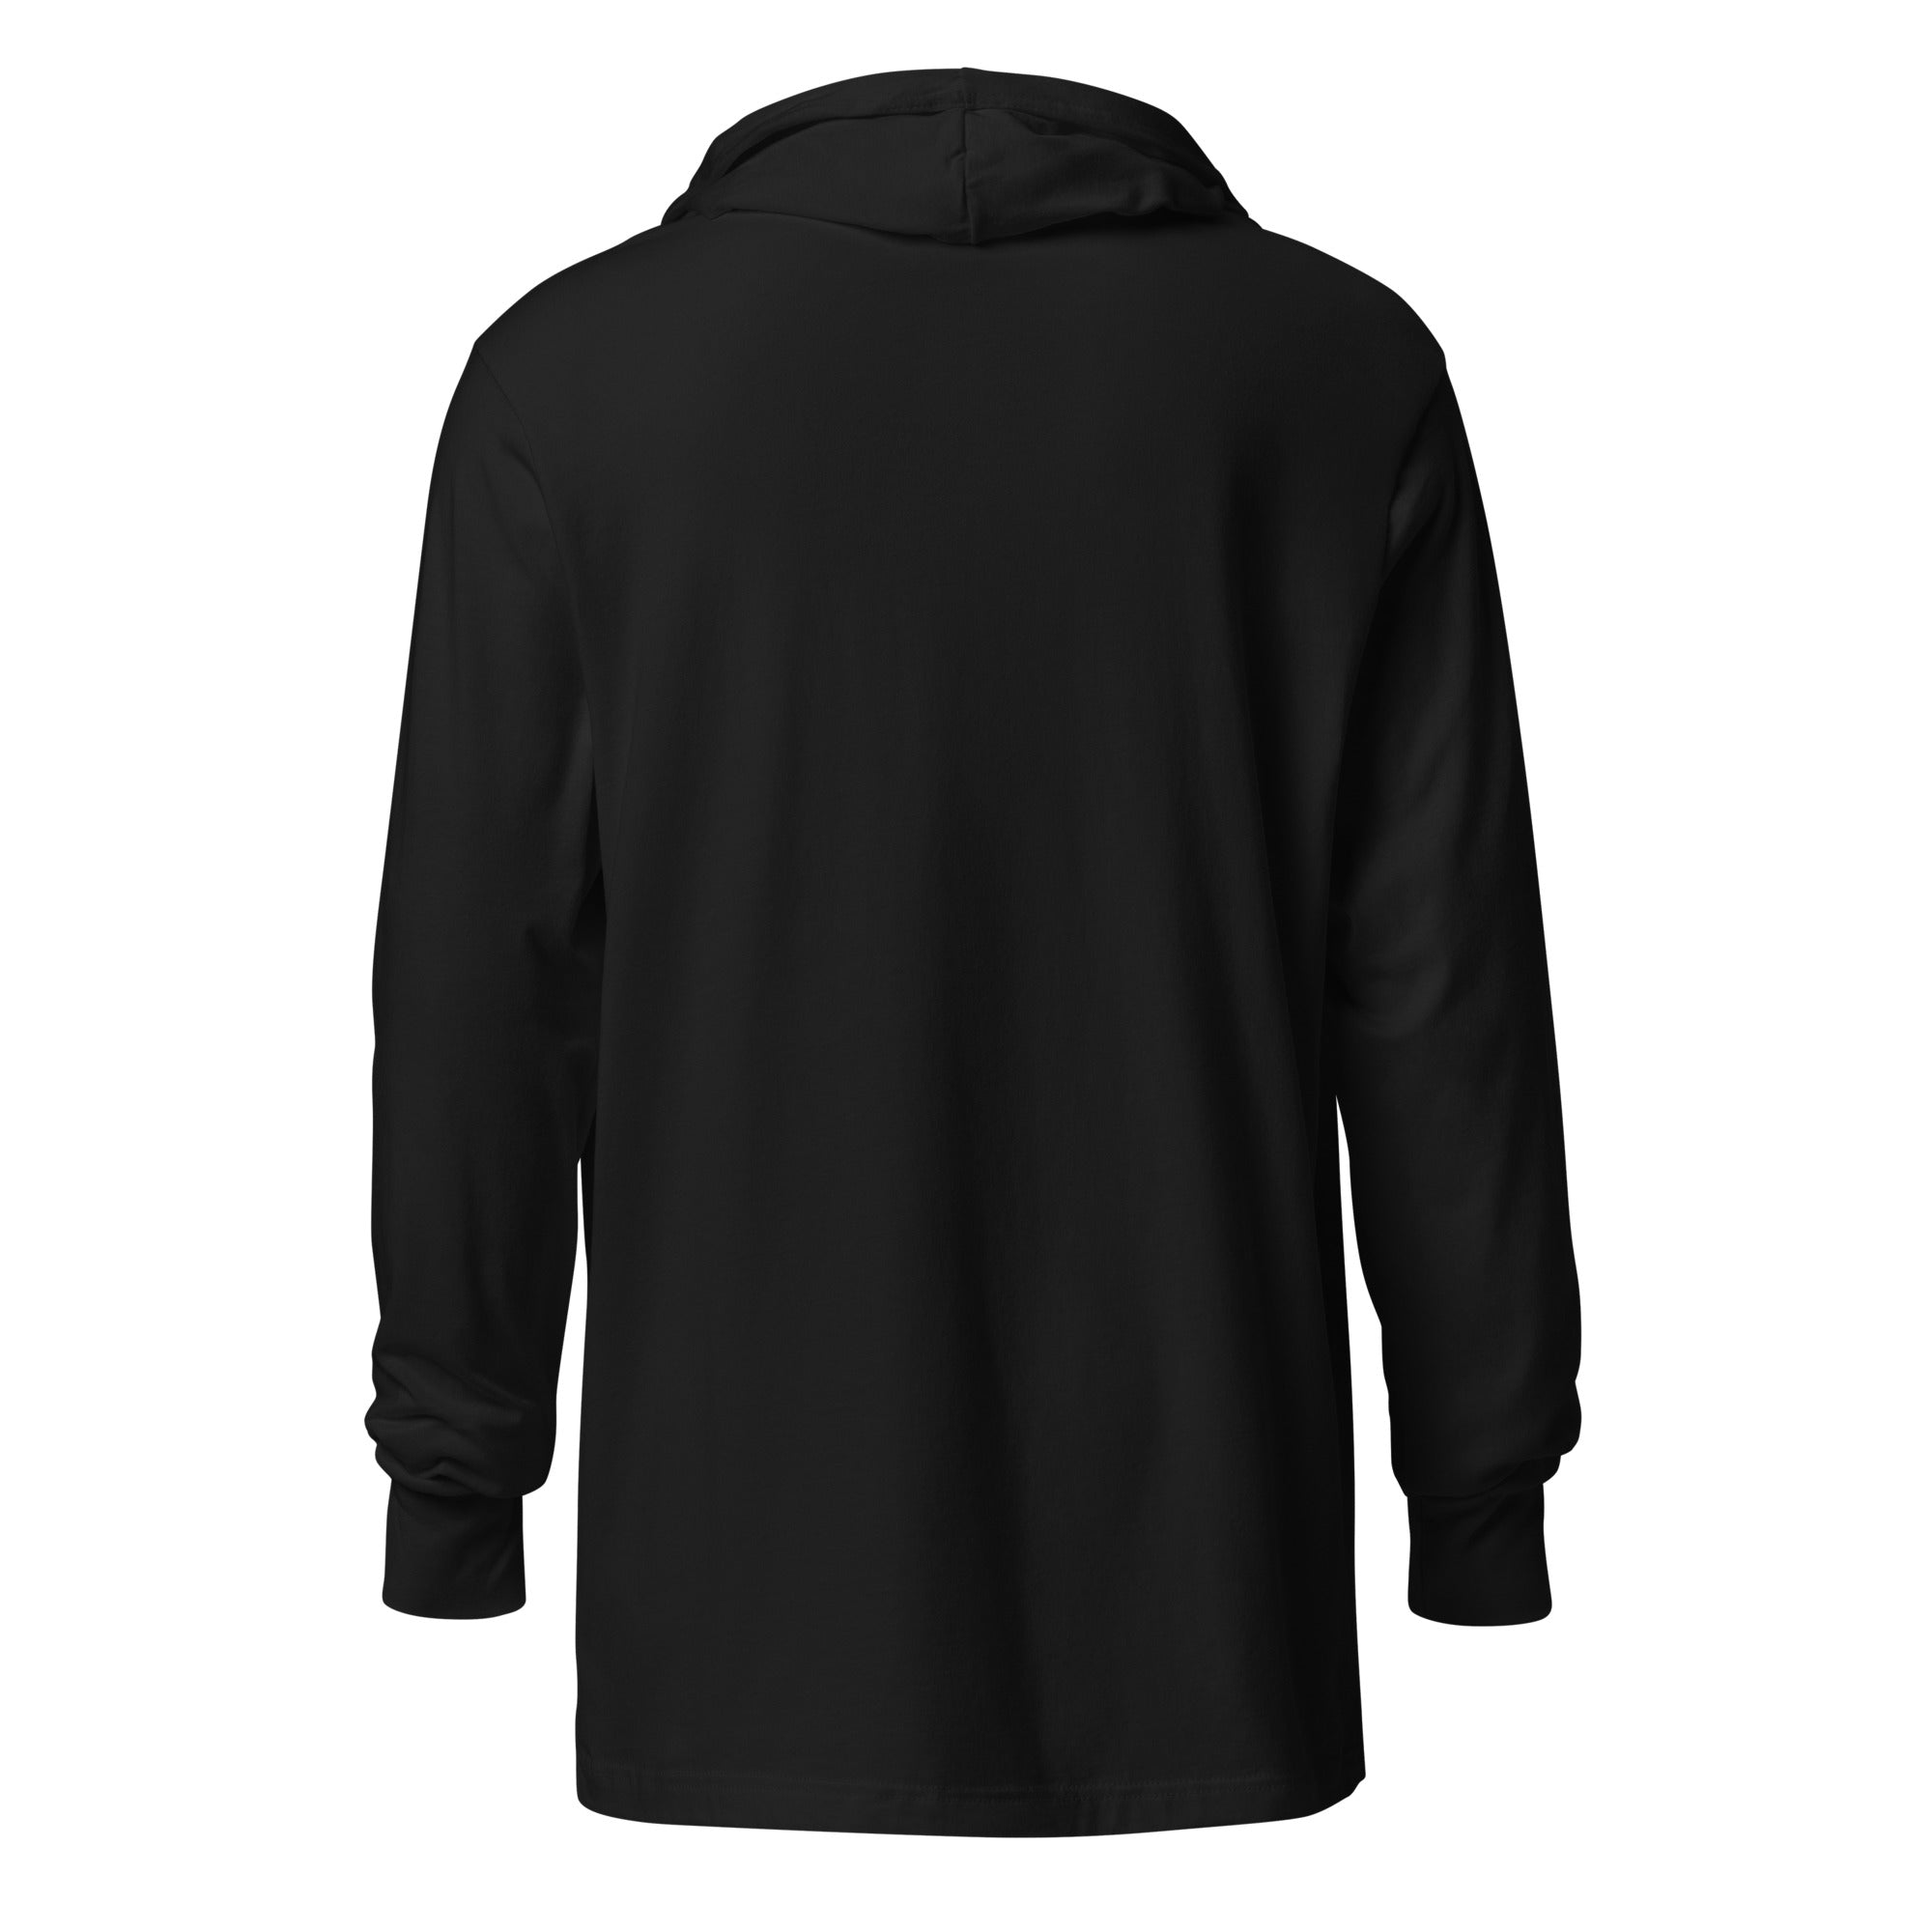 The NSA: The Only Part of Government That Actually Listens Hooded Long-sleeve T-Shirt